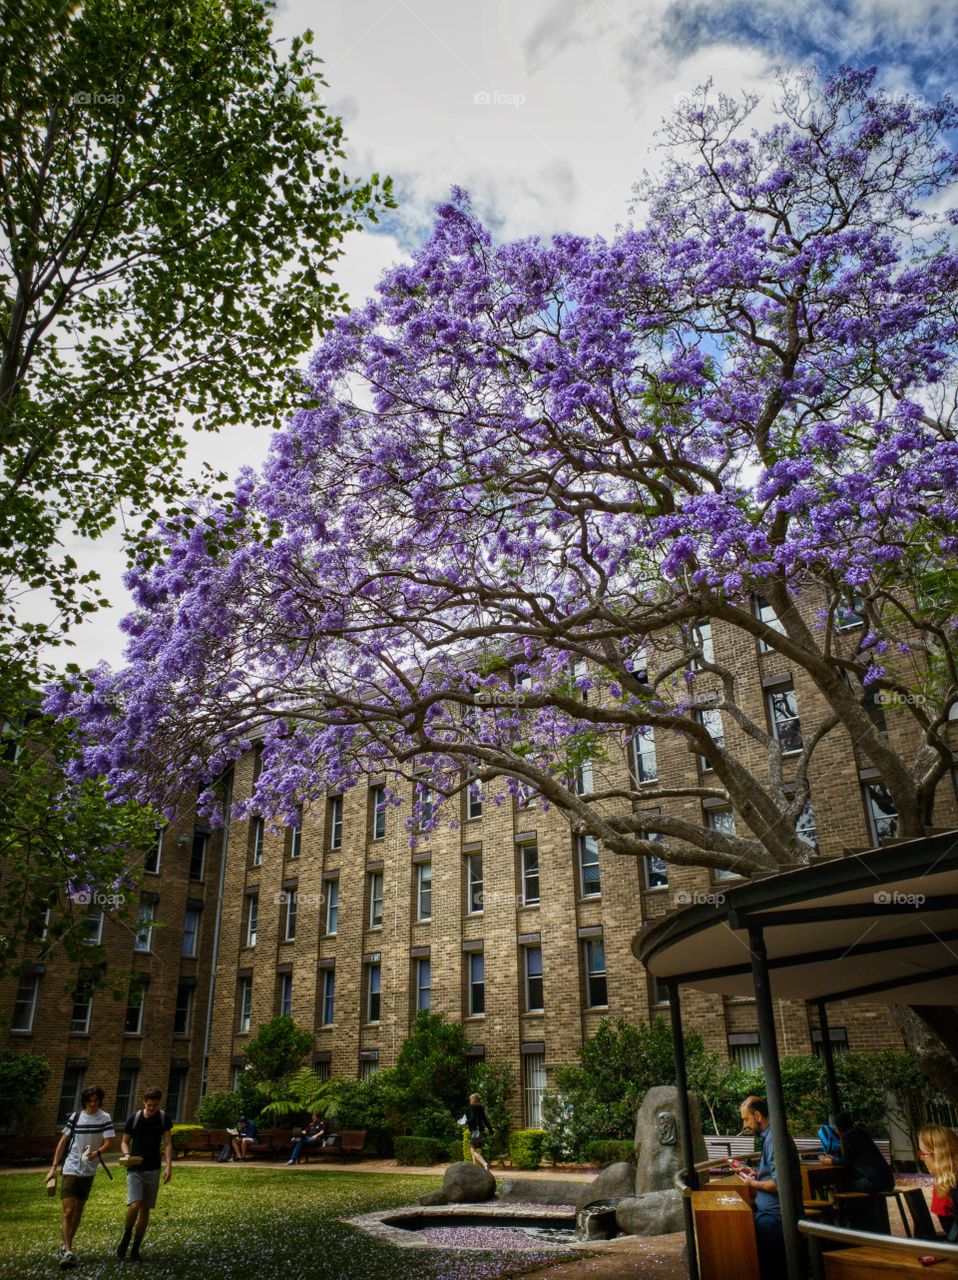 Jacaranda tree in bloom with violet flowers at the Morven Brown Building of the University of New South Wales, Kingsford. Image features spacious courtyard with people around the area.